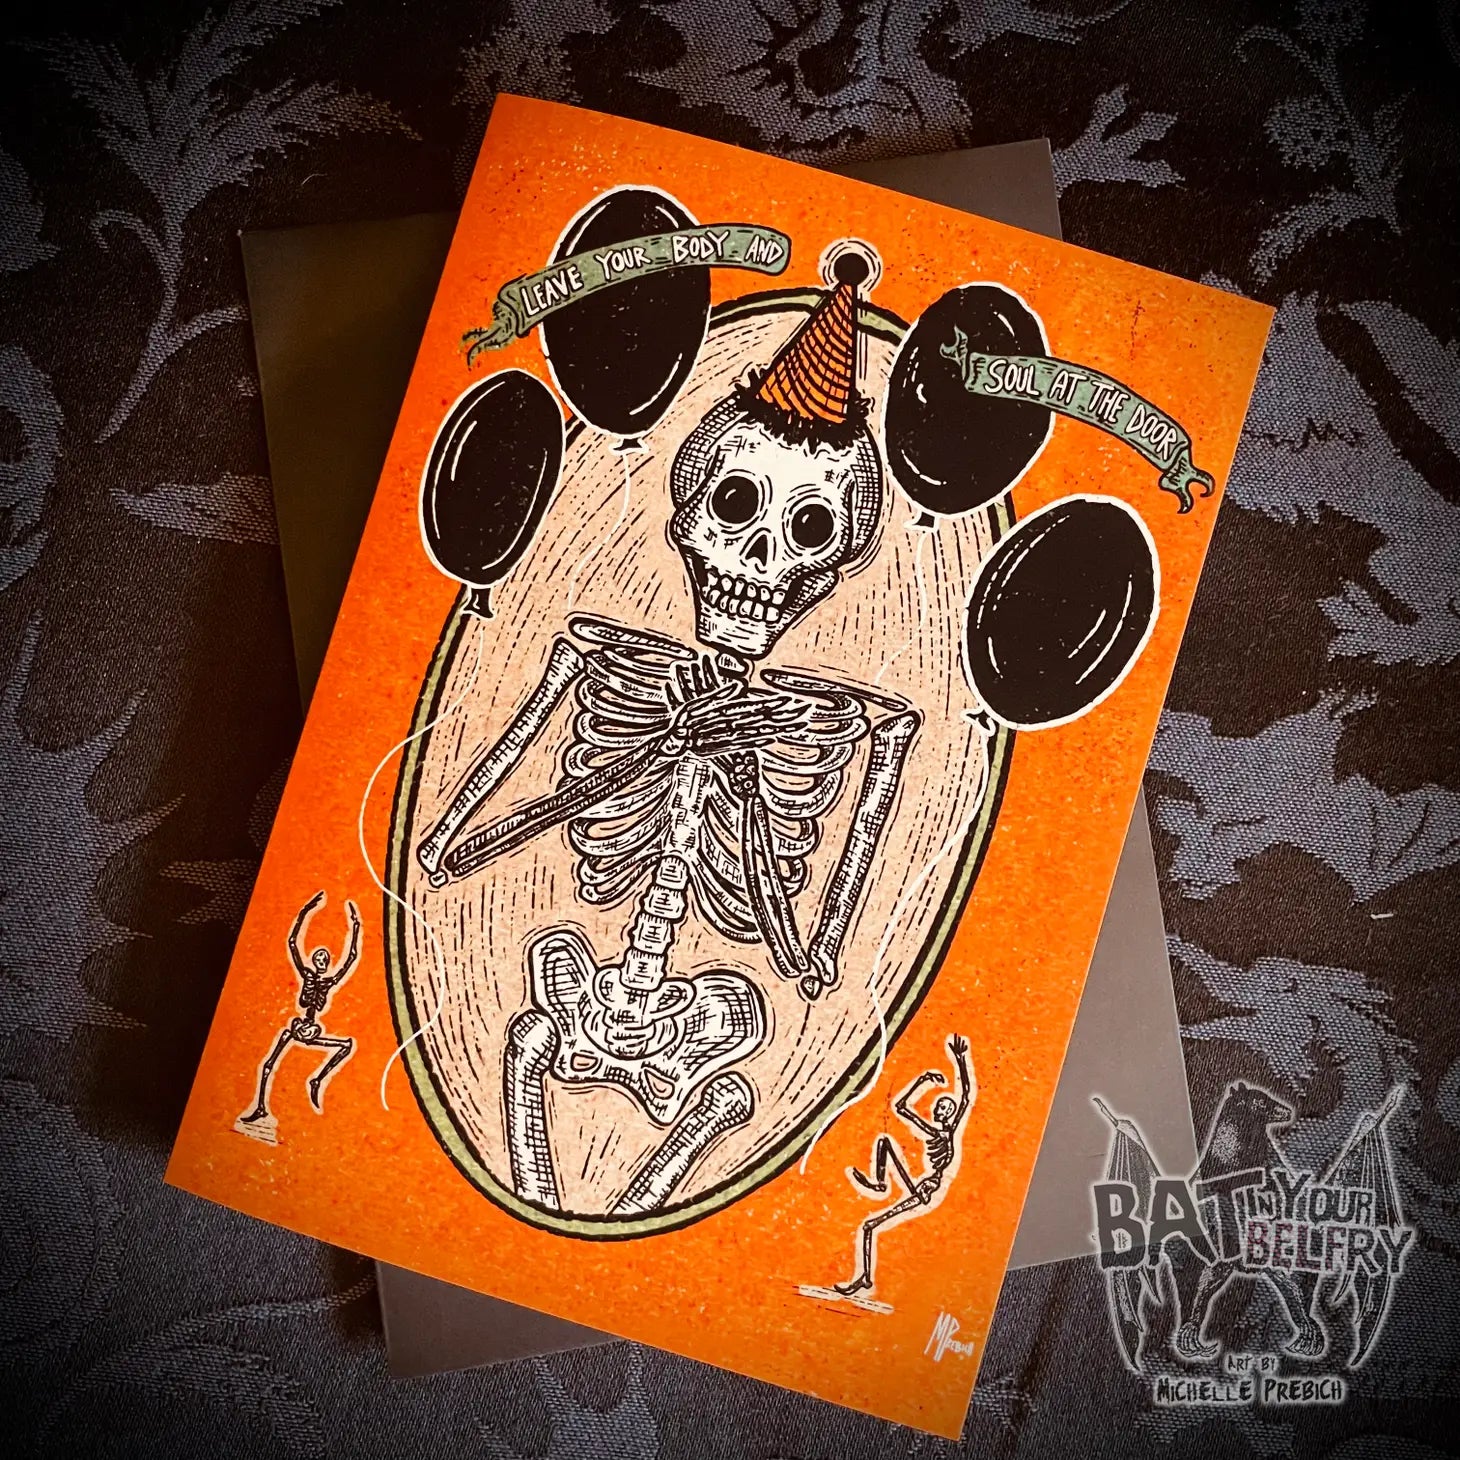 A birthday card with an illustration of a skeleton wearing an orange and black party hat surrounded by black balloons with the message “Leave your body and soul at the door”. There are two small dancing skeletons at the bottom of the card in front of an orange background